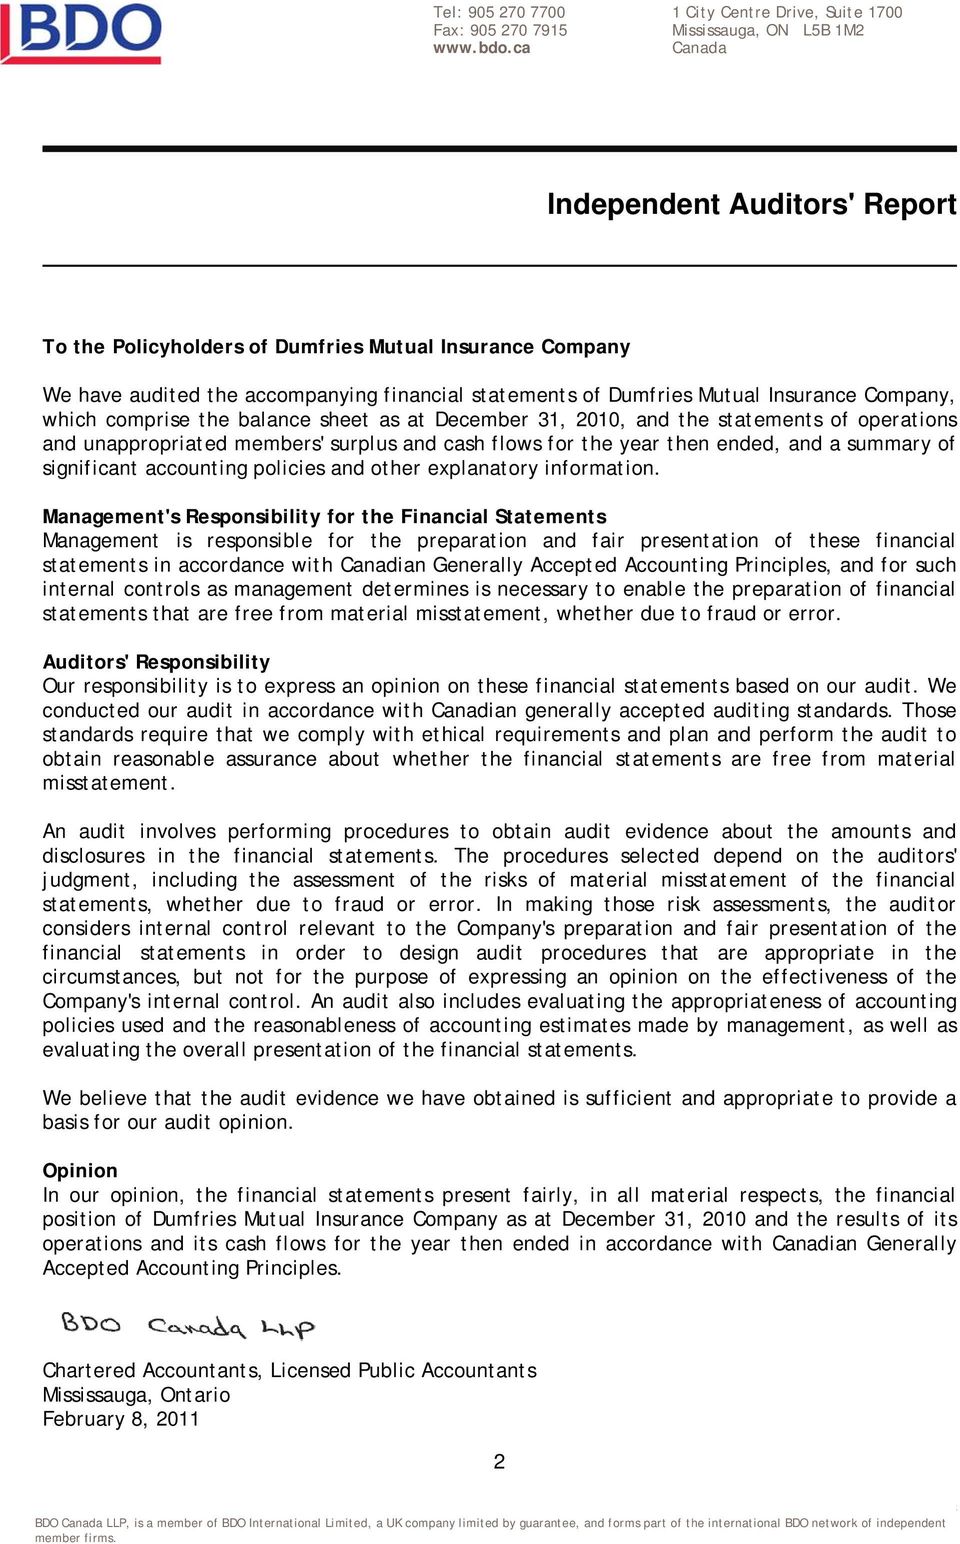 statements of Dumfries Mutual Insurance Company, which comprise the balance sheet as at December 31, 2010, and the statements of operations and unappropriated members' surplus and cash flows for the